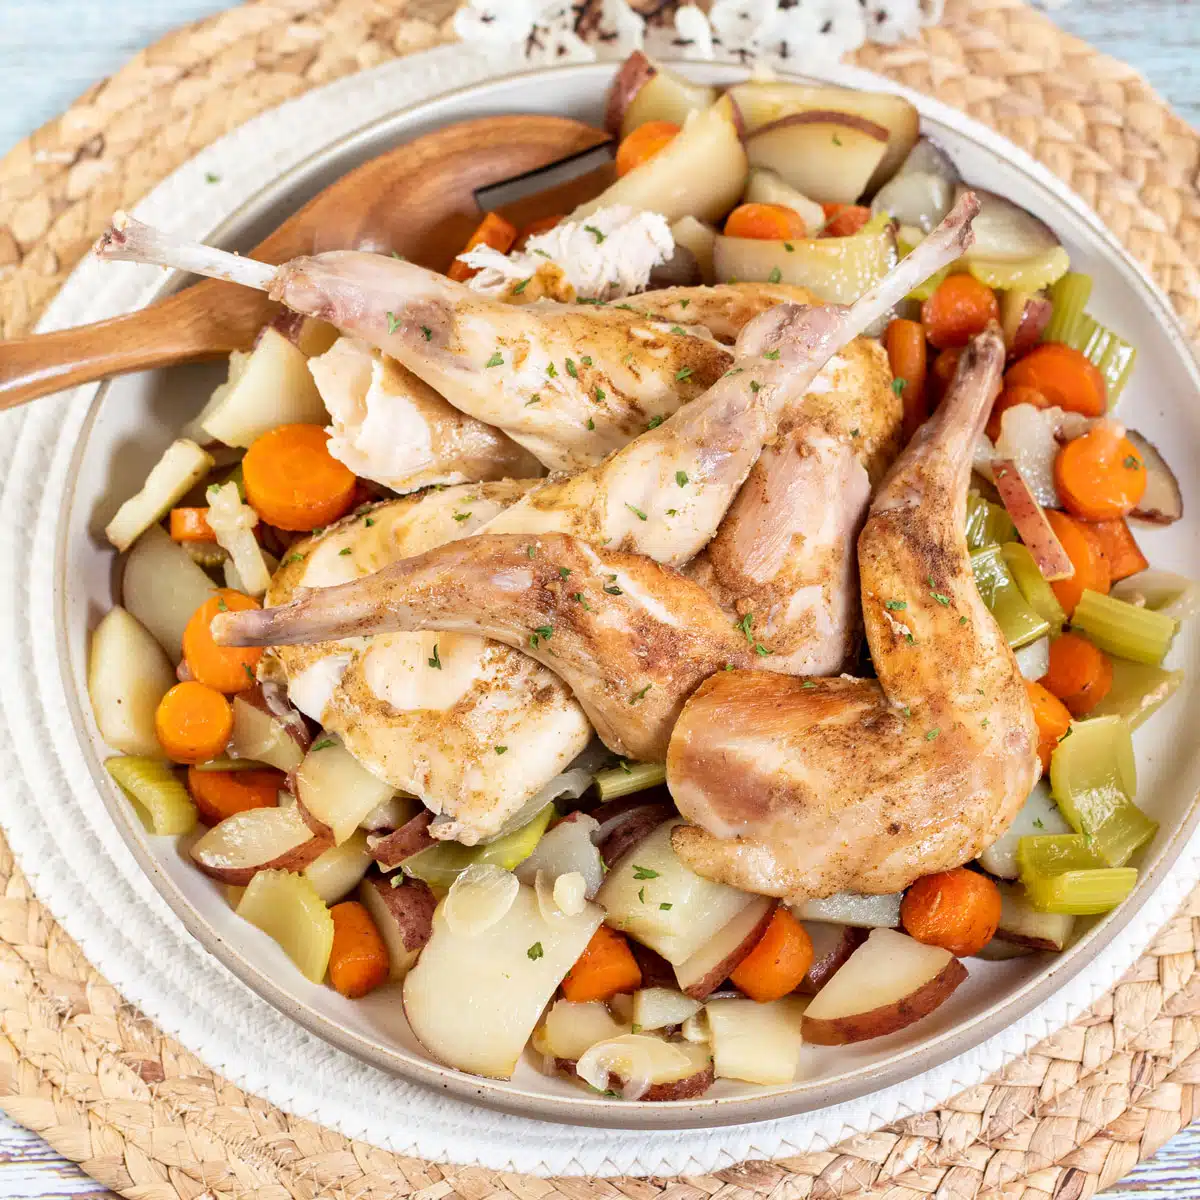 Square image of a whole roasted rabbit with root vegetables.